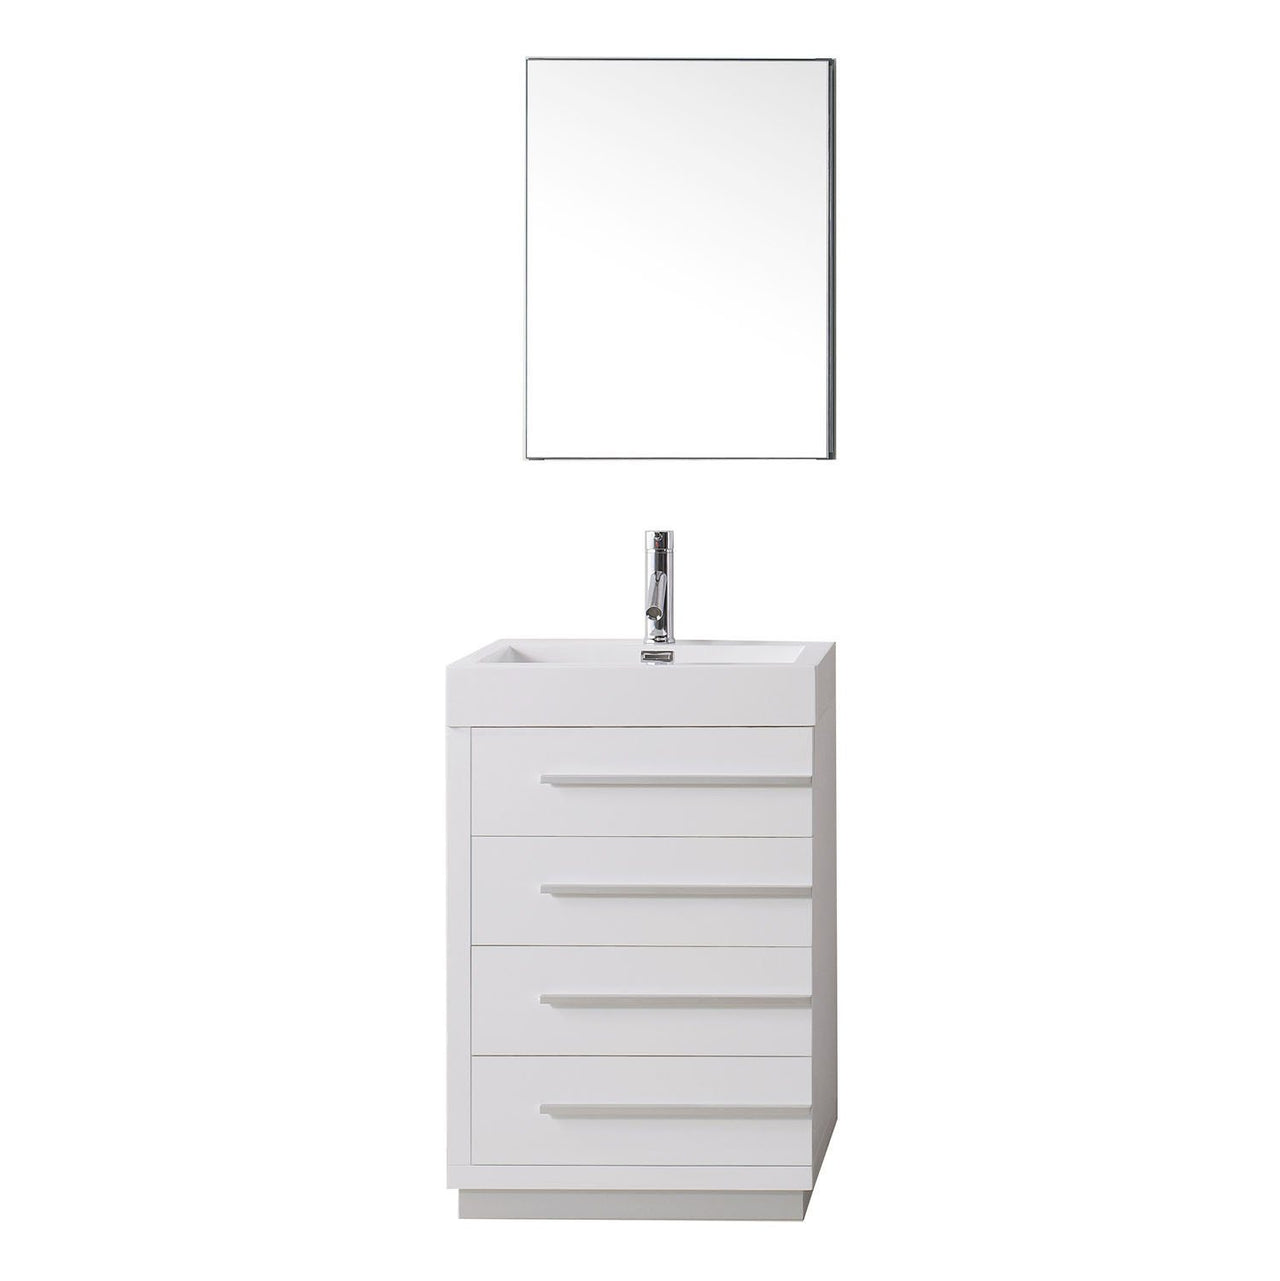 Virtu USA Bailey 24" Single Square Sink Gloss White Top Vanity in Gloss White with Brushed Nickel Faucet and Mirror Vanity Virtu USA 